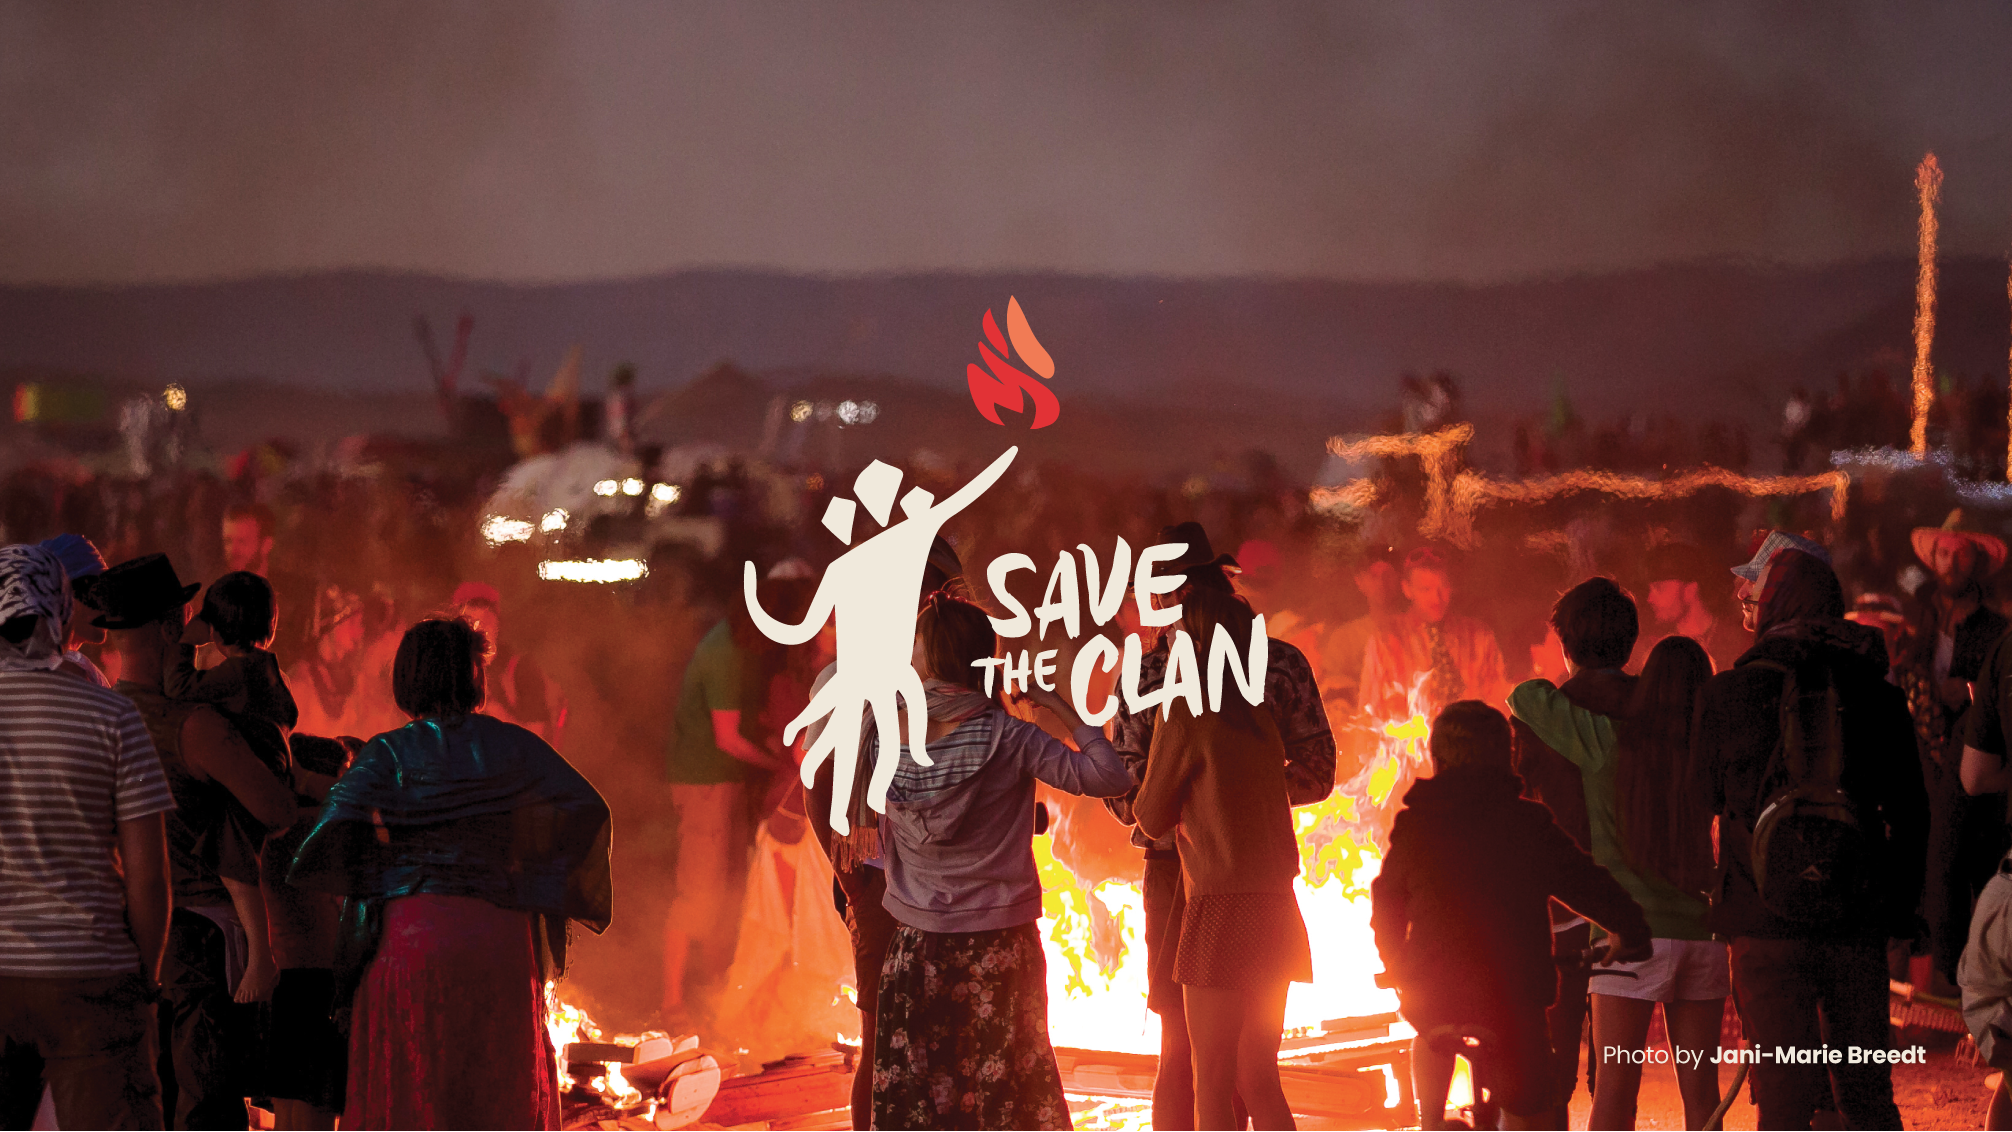 Save The Clan for AfrikaBurn - South Africa